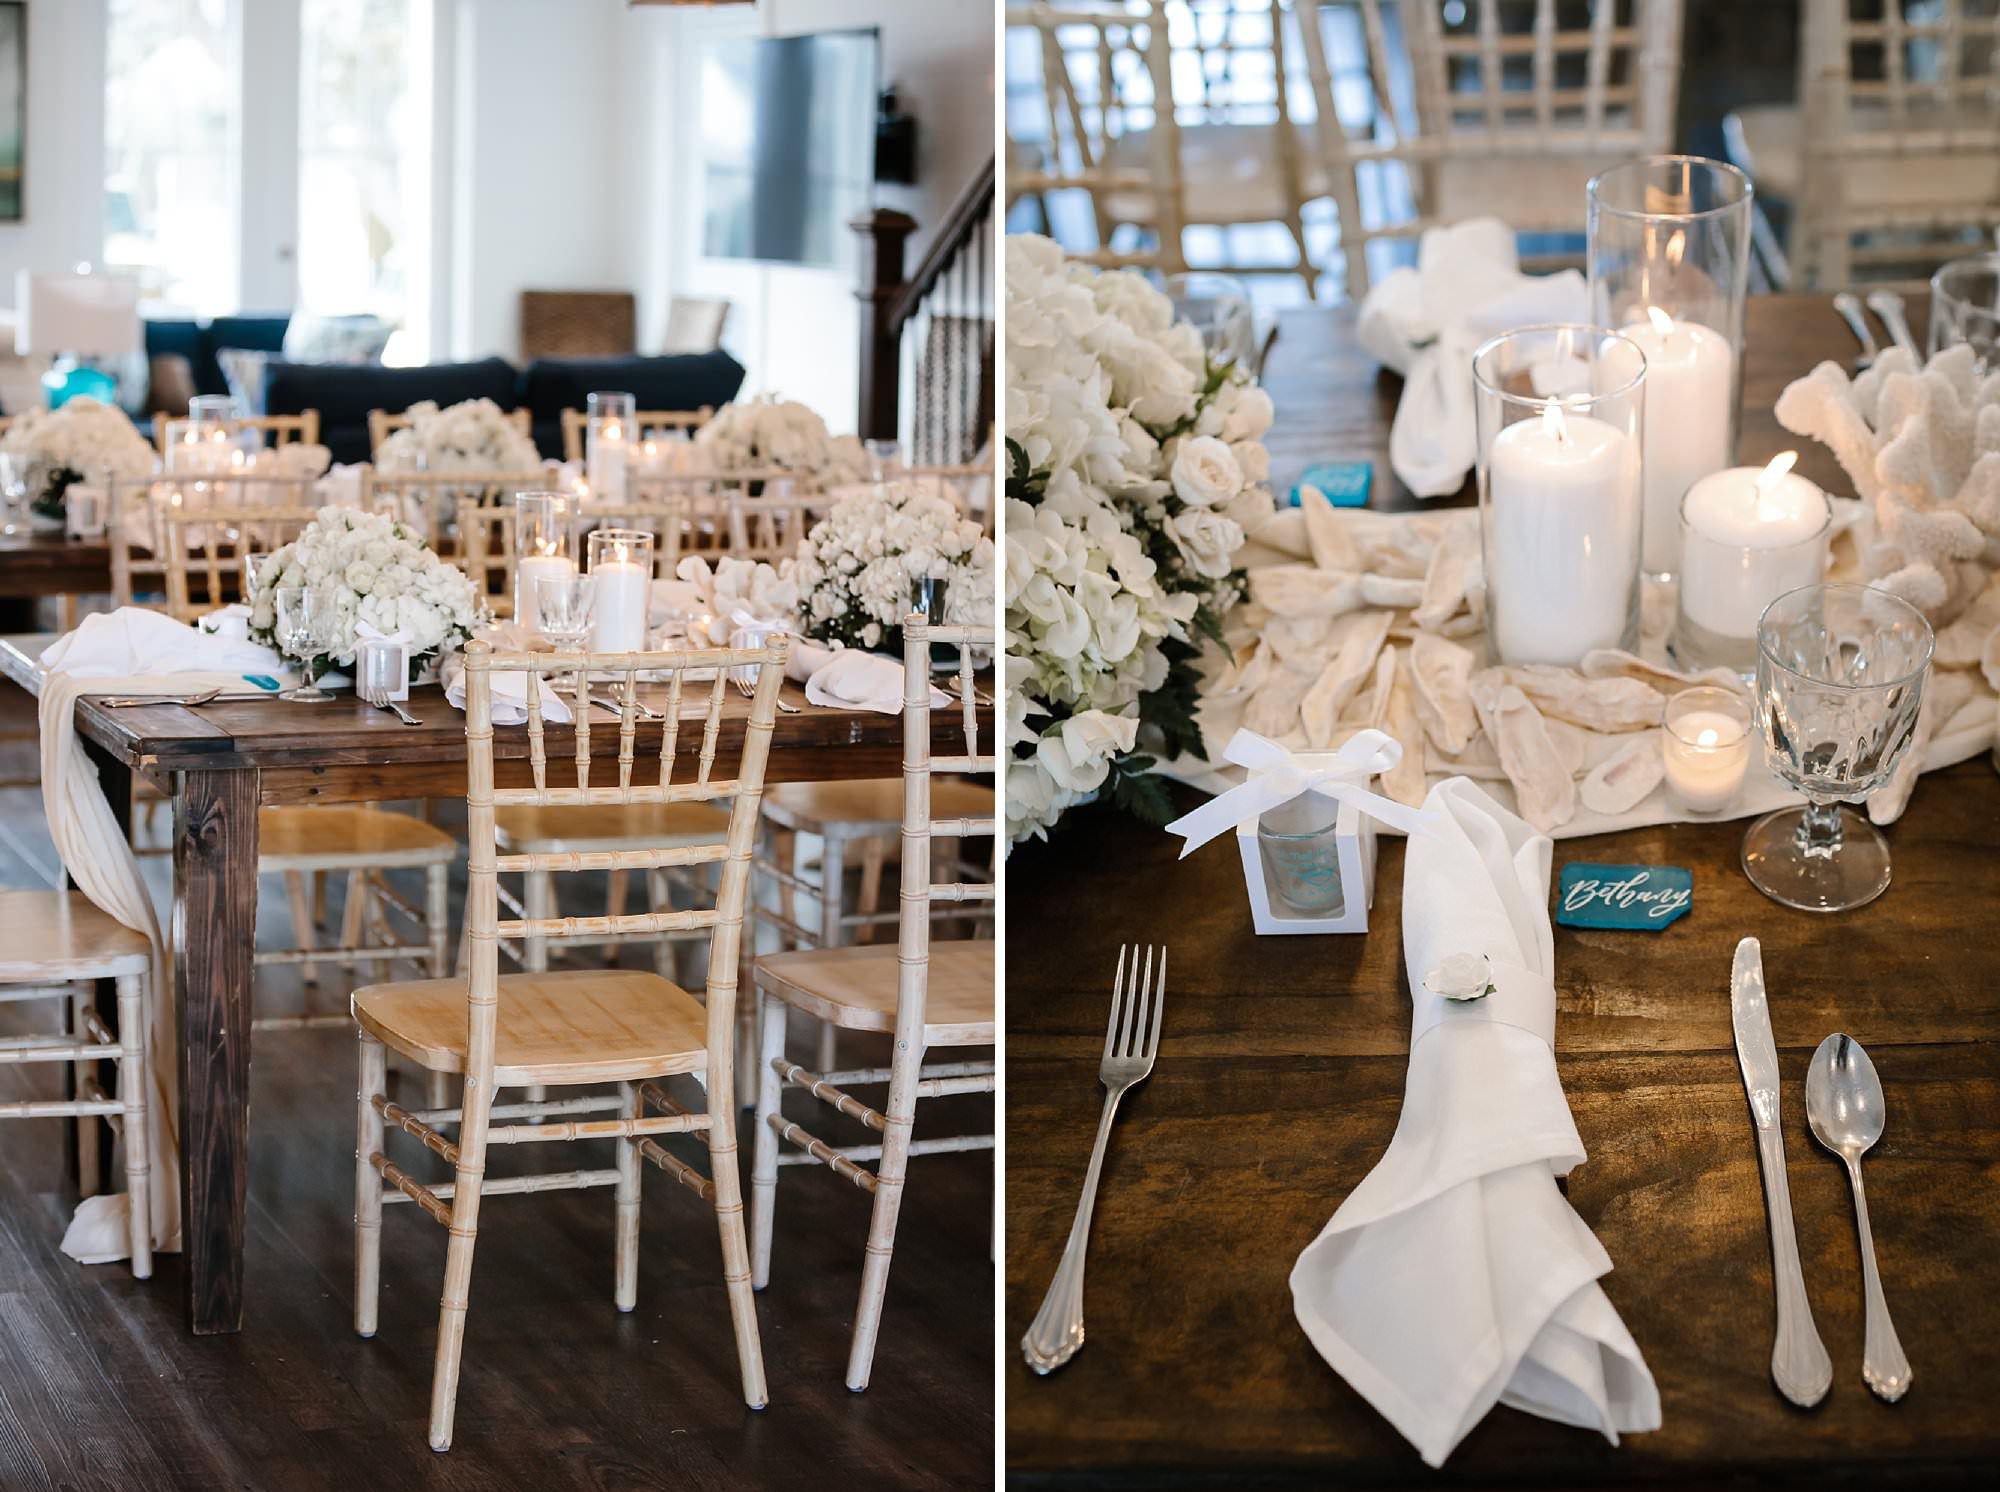 Wedding reception table decor of dark wood farm table set with white rose centerpieces white shells, candles, shot glass favors, white linens and aqua sea glass place cards